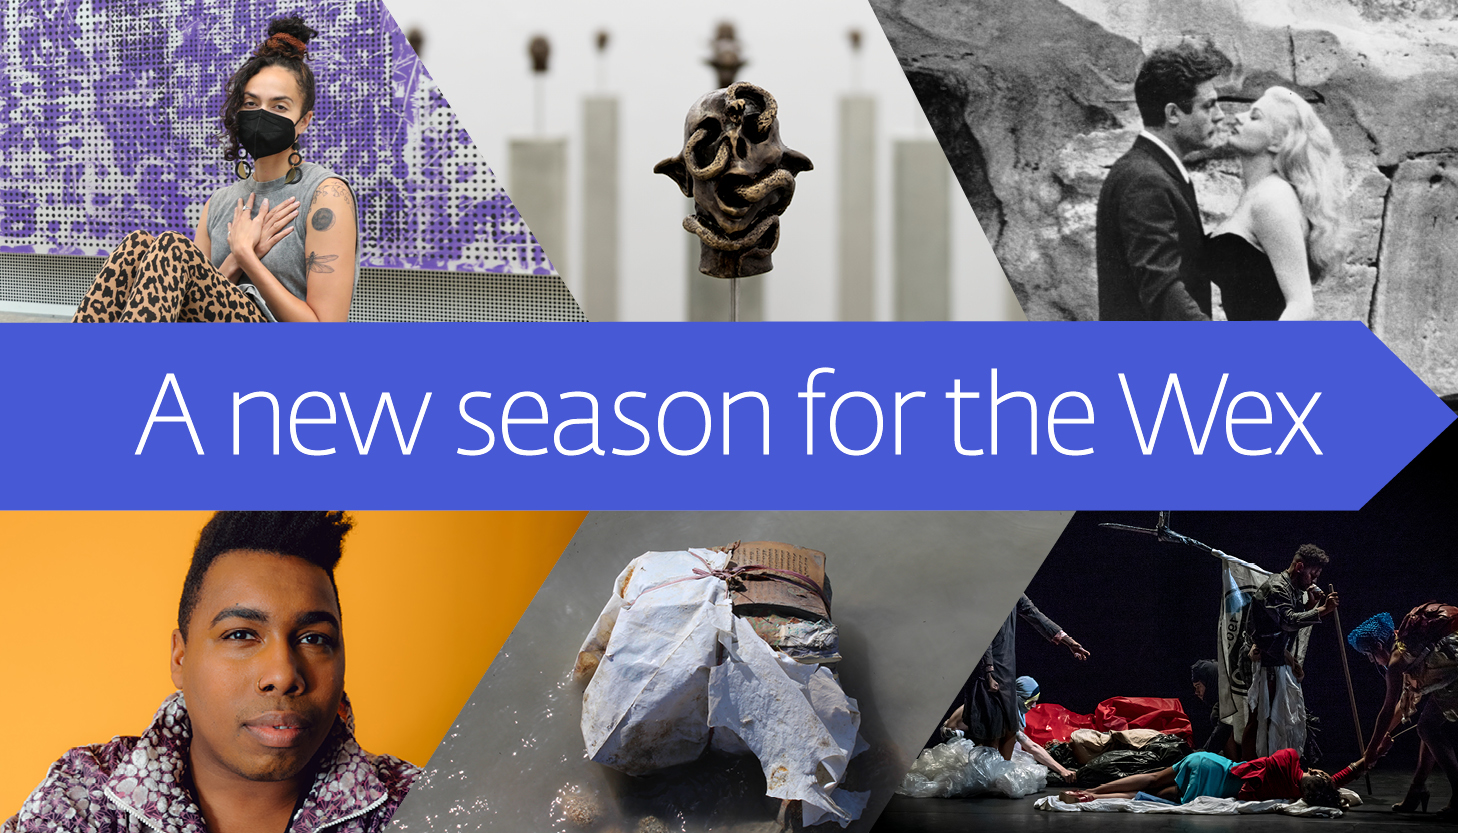 The words “A new season for the Wex” in white font inside a blue arrow, which is pointing to the right and is surrounded by two rows images—also cropped in the shape of arrows—from our upcoming season.